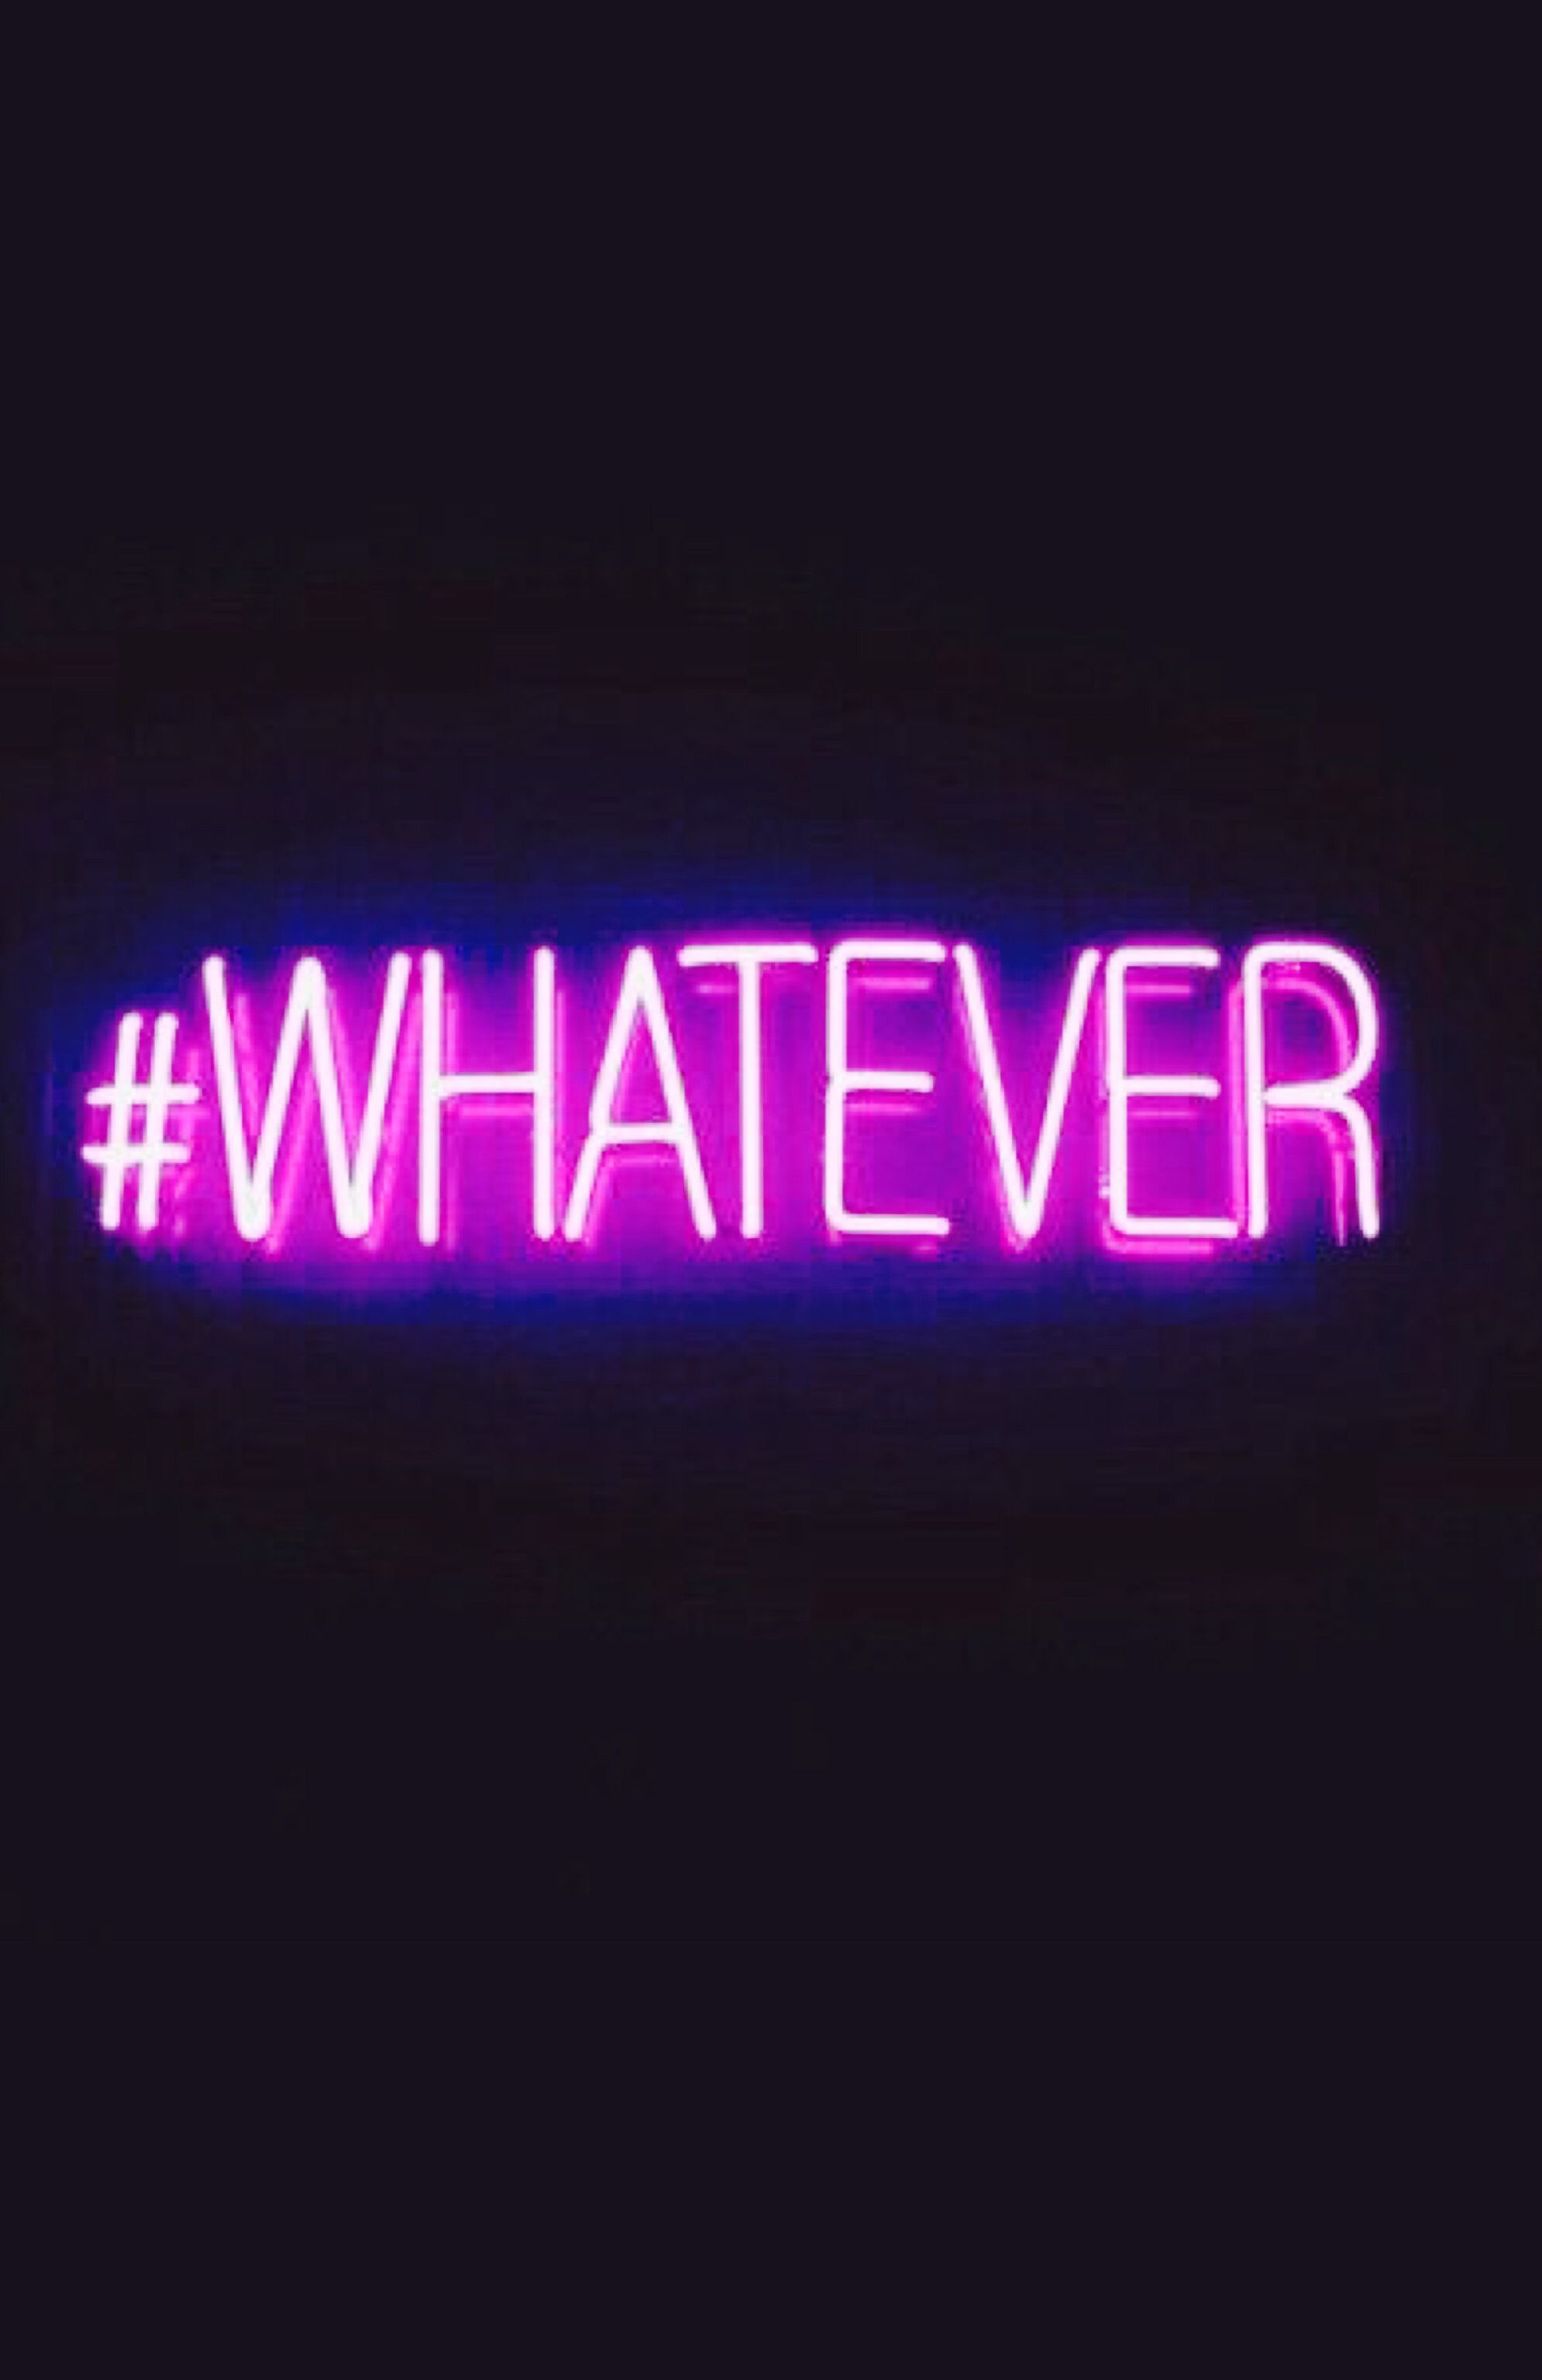 whatever wallpaper,text,neon,electronic signage,neon sign,display device